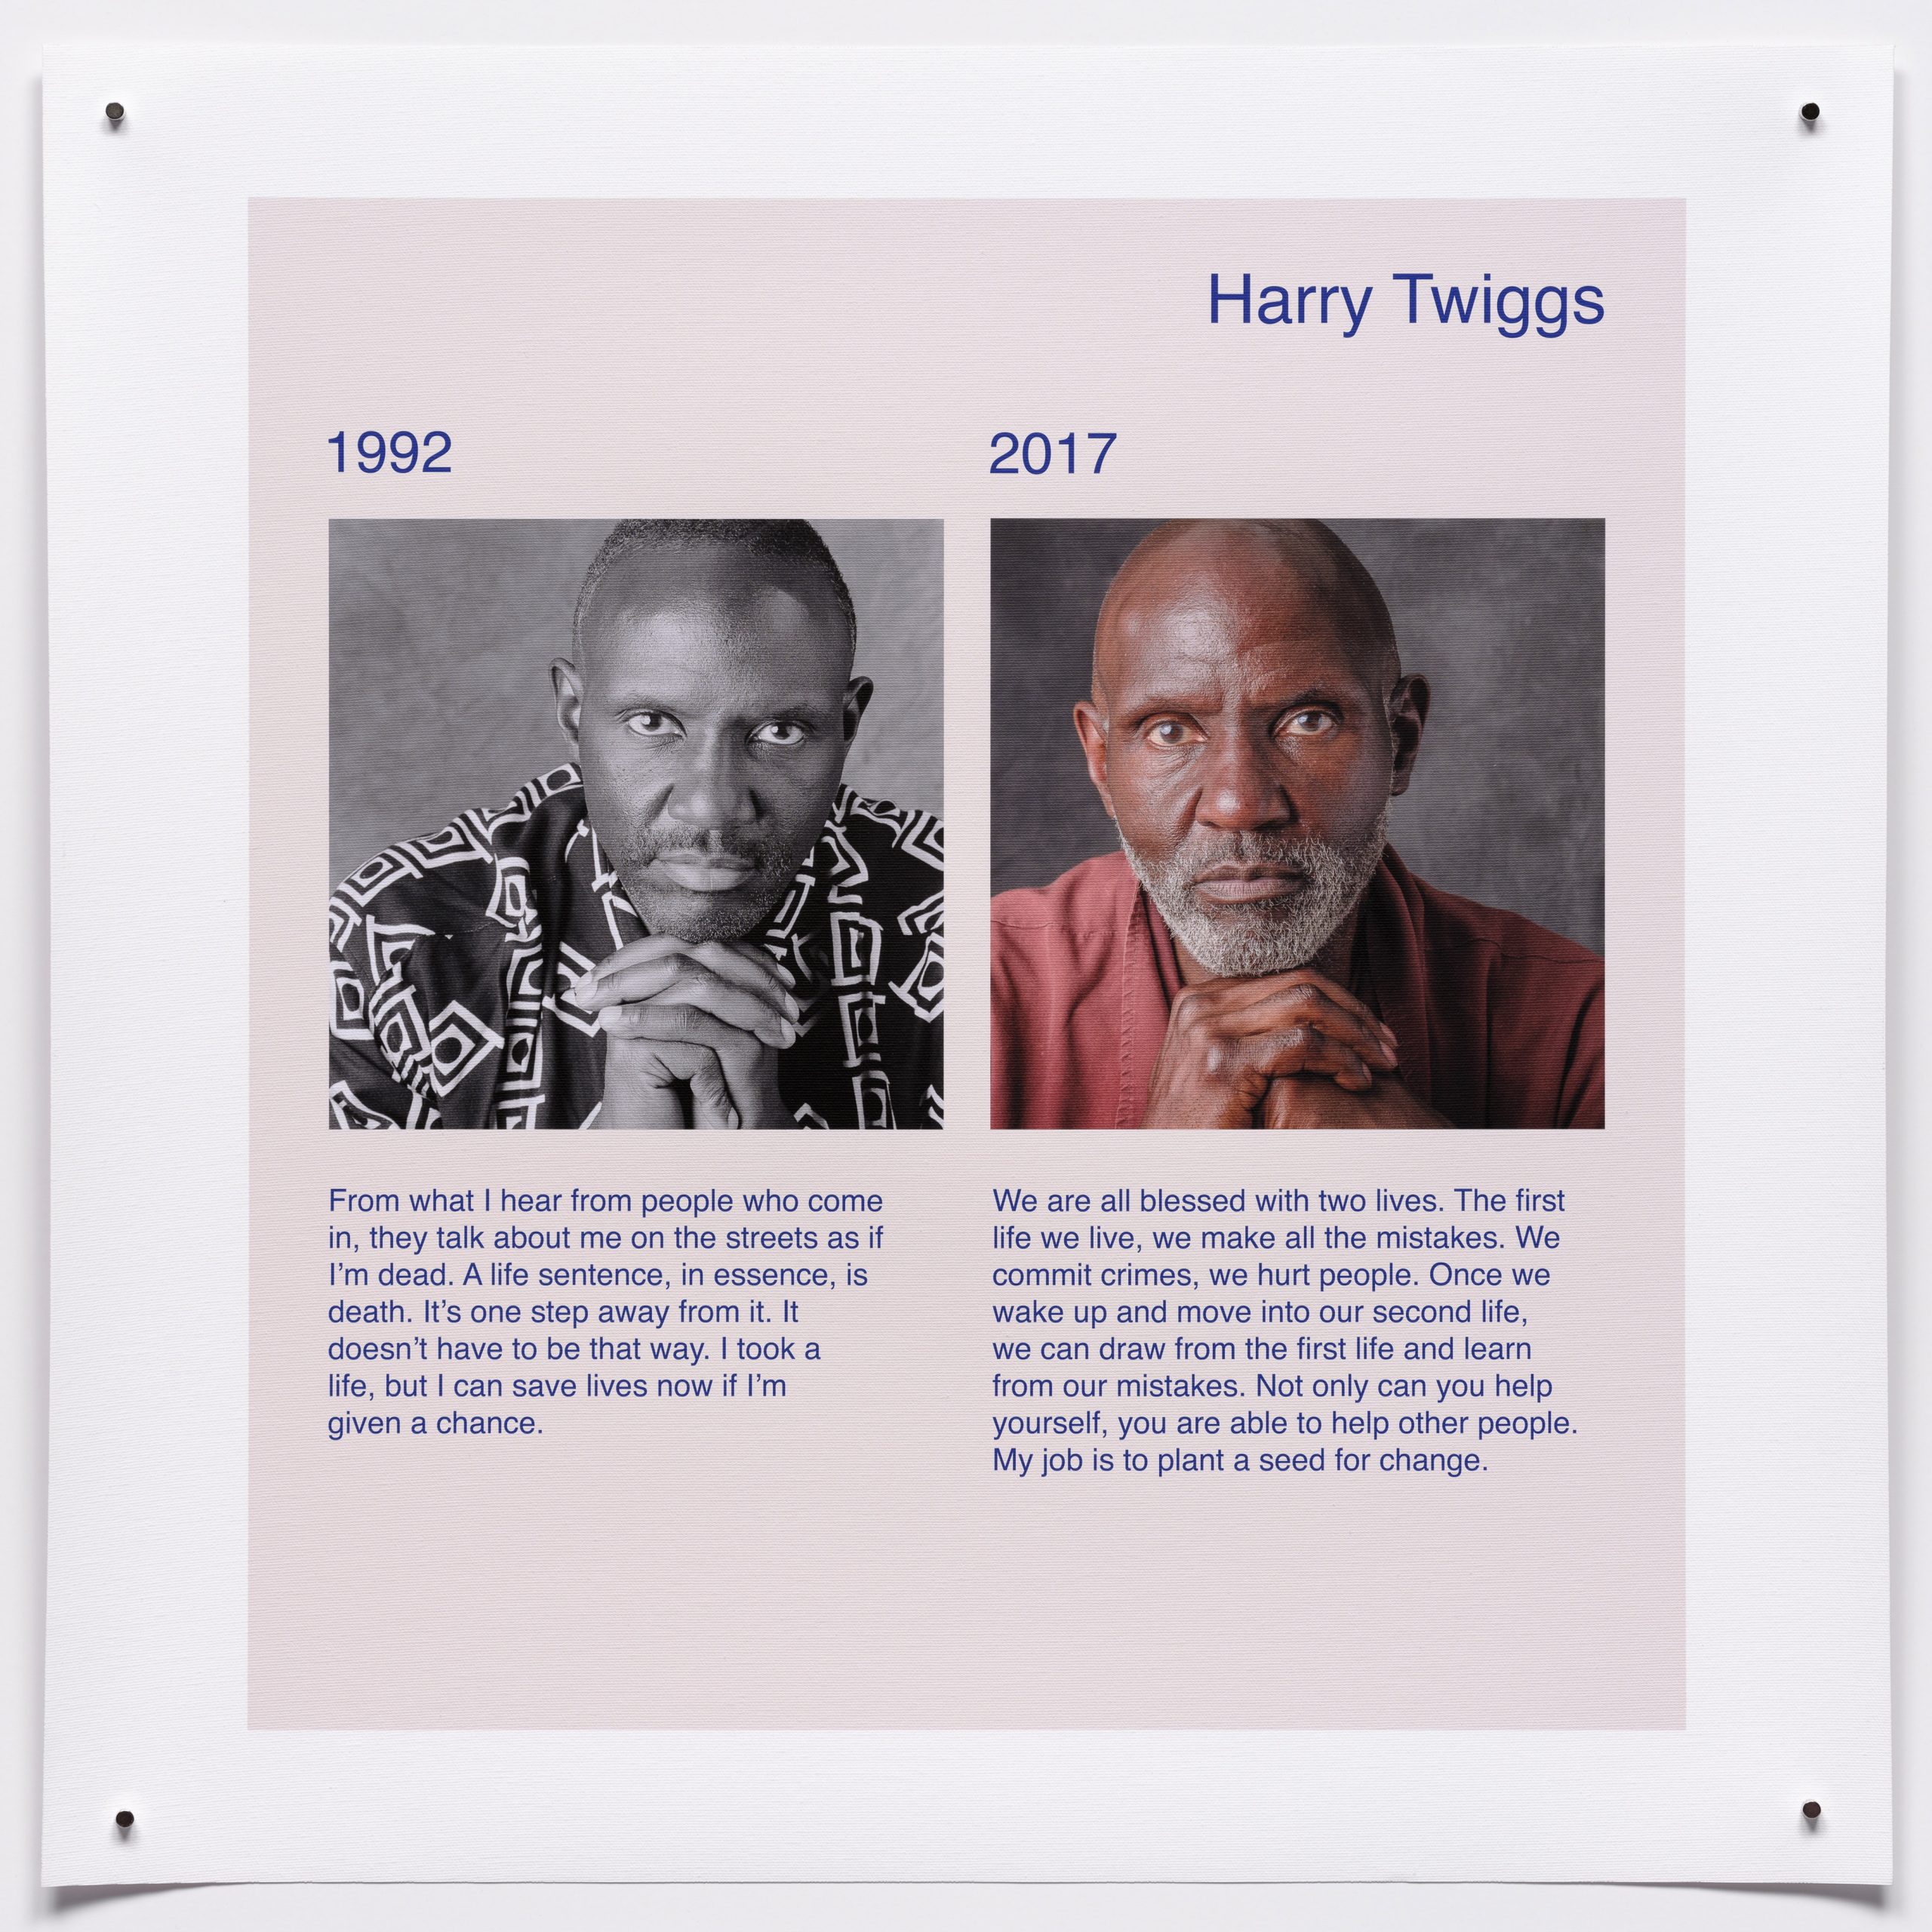 Two photographs side by side of Harry Twigs, taken in 1992 and 2017, one in black and white and the other in colour. Twigs is Black and in both photos he holds clasped hands beneath his chin. Text statements appear beneath each photo.